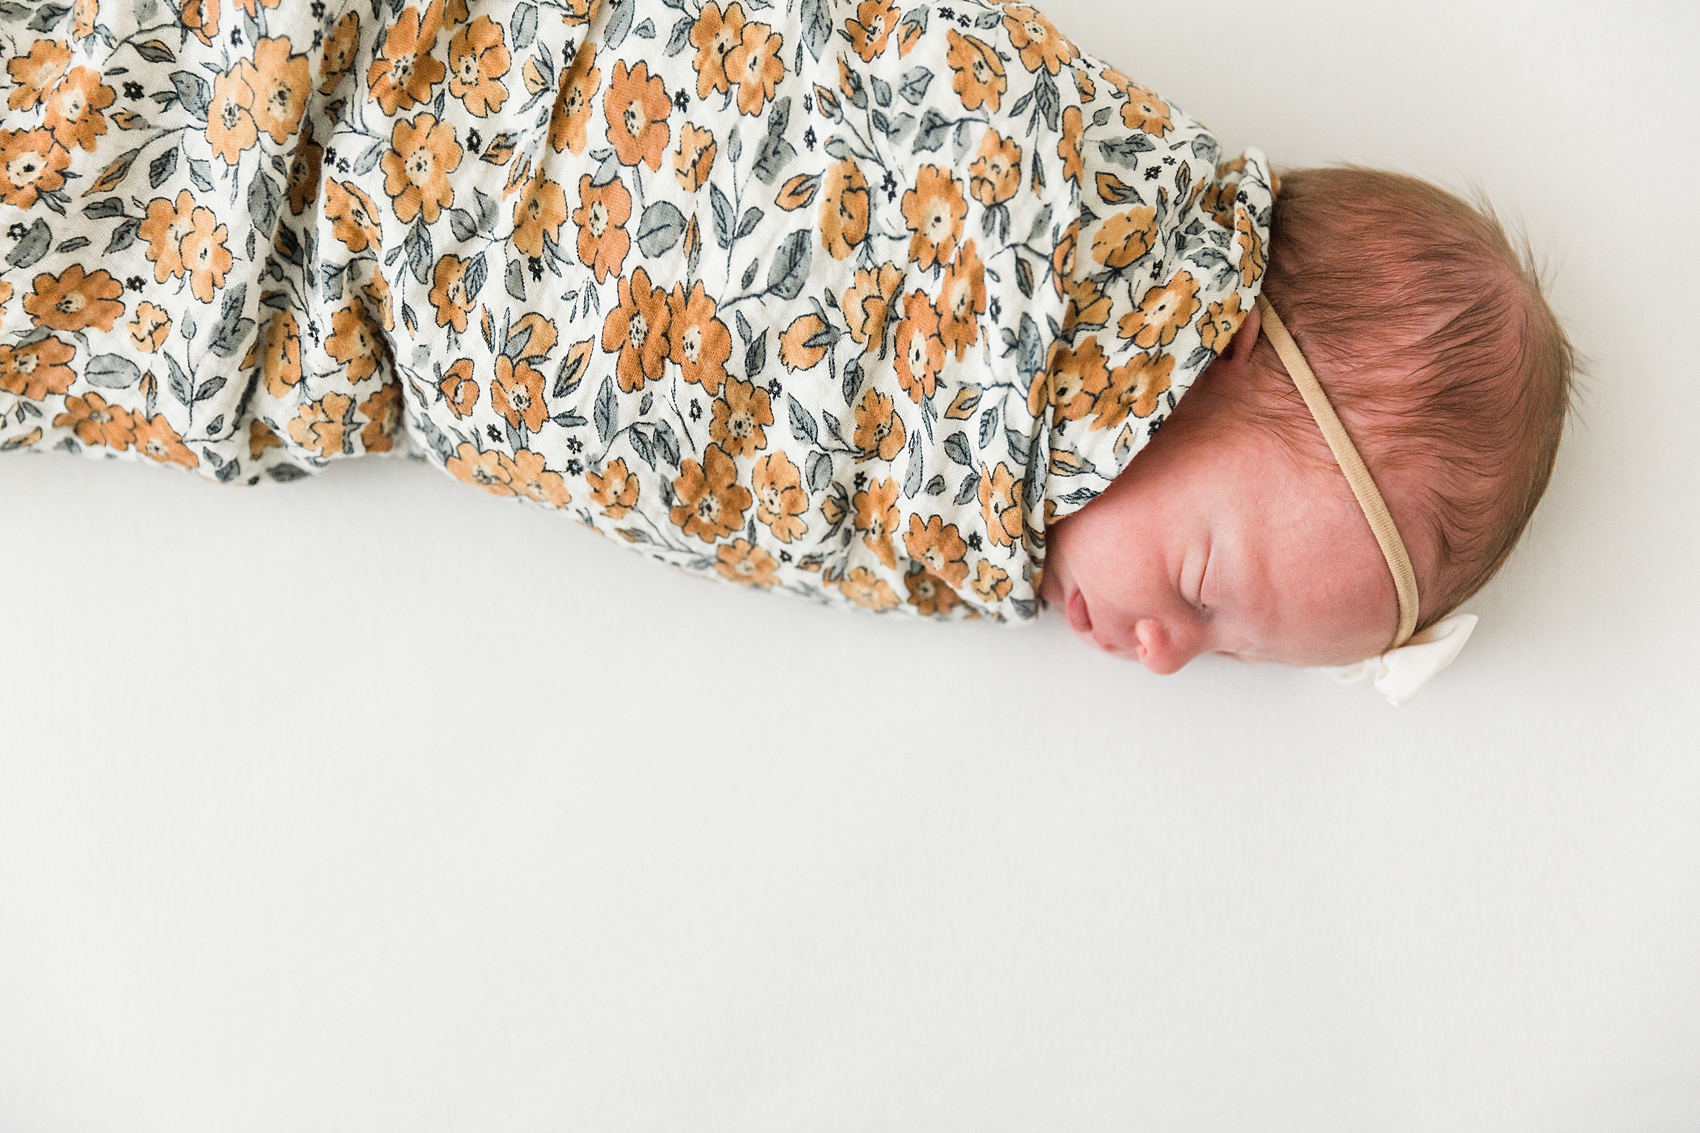 Leah Hope Photography | Scottsdale Phoenix Arizona | Newborn Pictures | Baby Nursery Photos | Indoor Lifestyle Session | Dreamy Nursery | Sibling Photos | What to Wear | Lifestyle Newborn